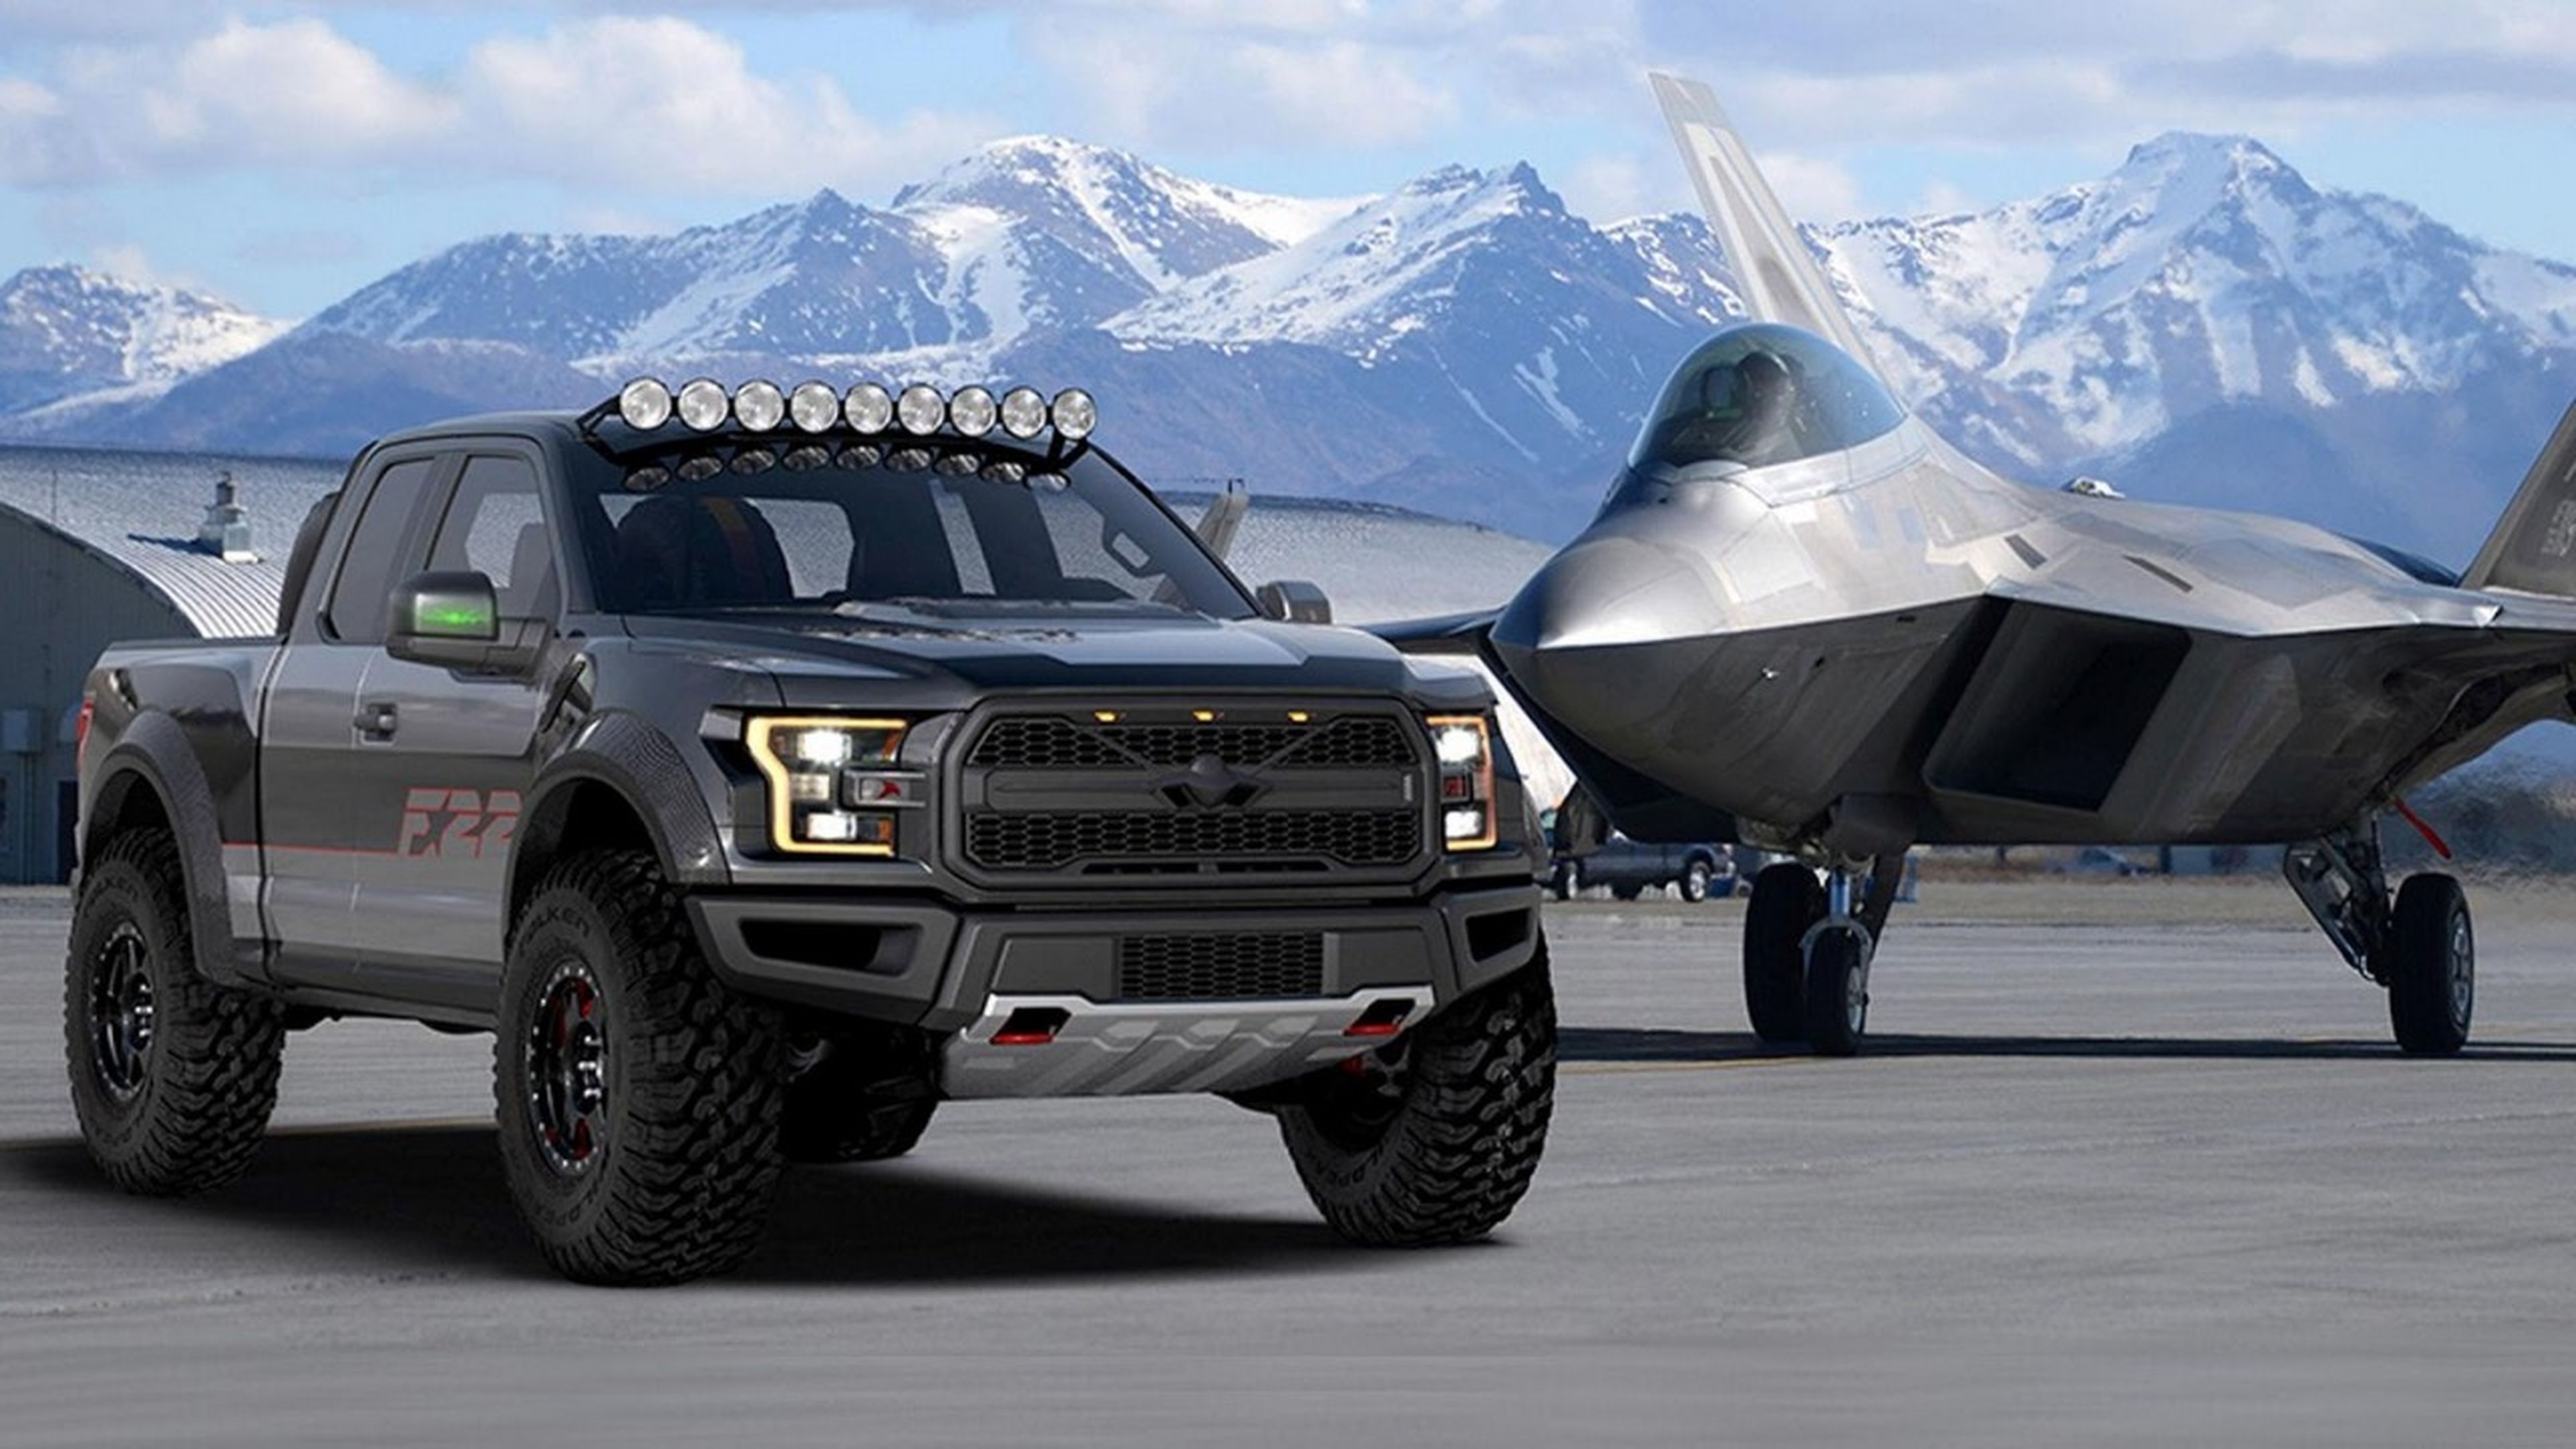 Ford F-22